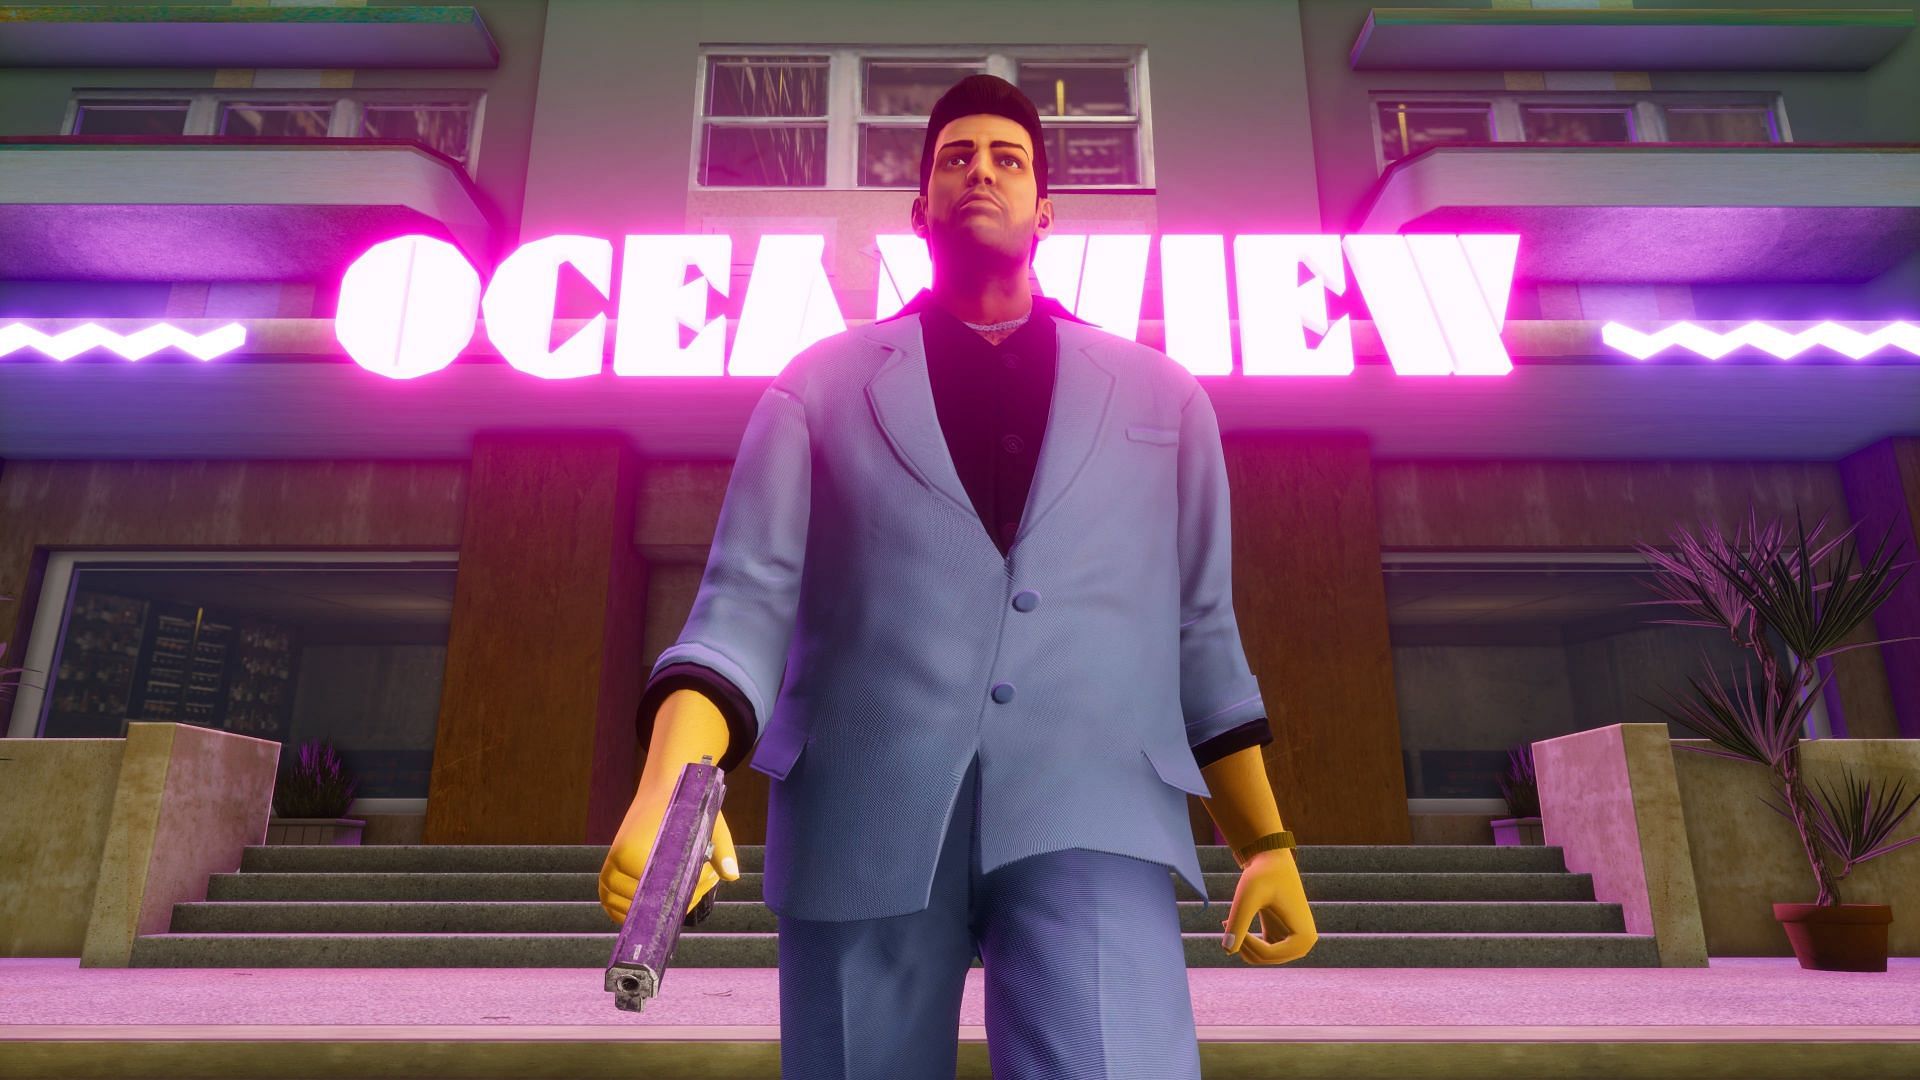 GTA 3, Vice City, and San Andreas will be brought to a new generation of gamers (Image via Rockstar Games)